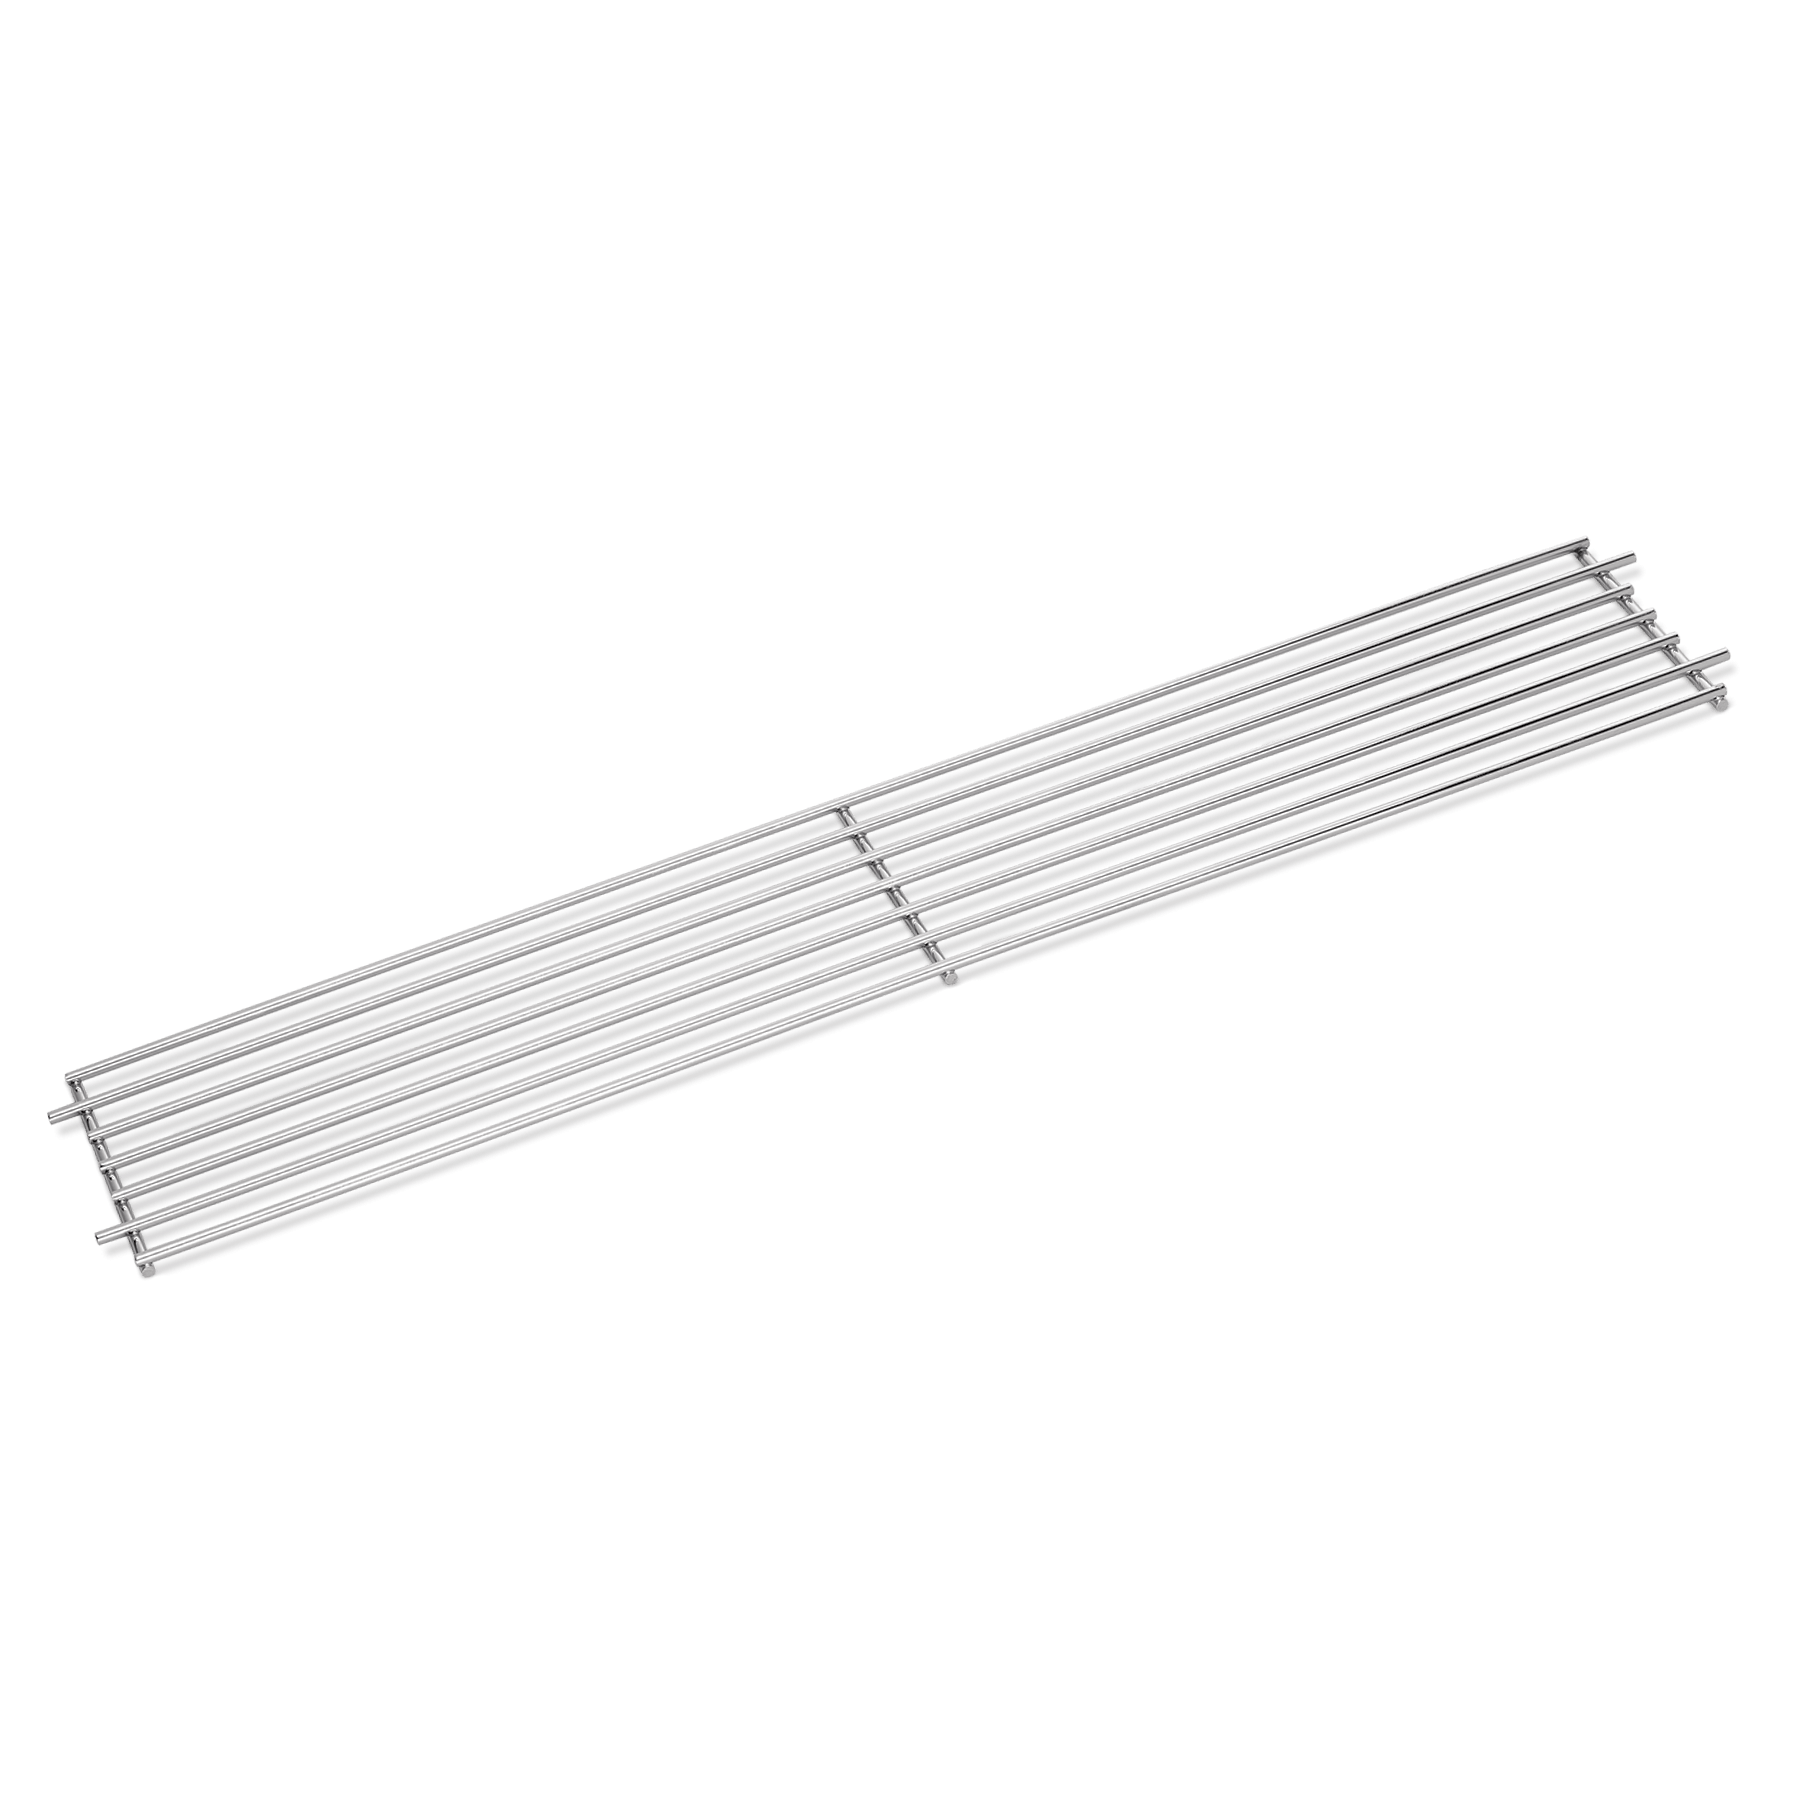 Genuine Weber Genesis Gold B Gold C Grill Replacement Warming Rack 80623 